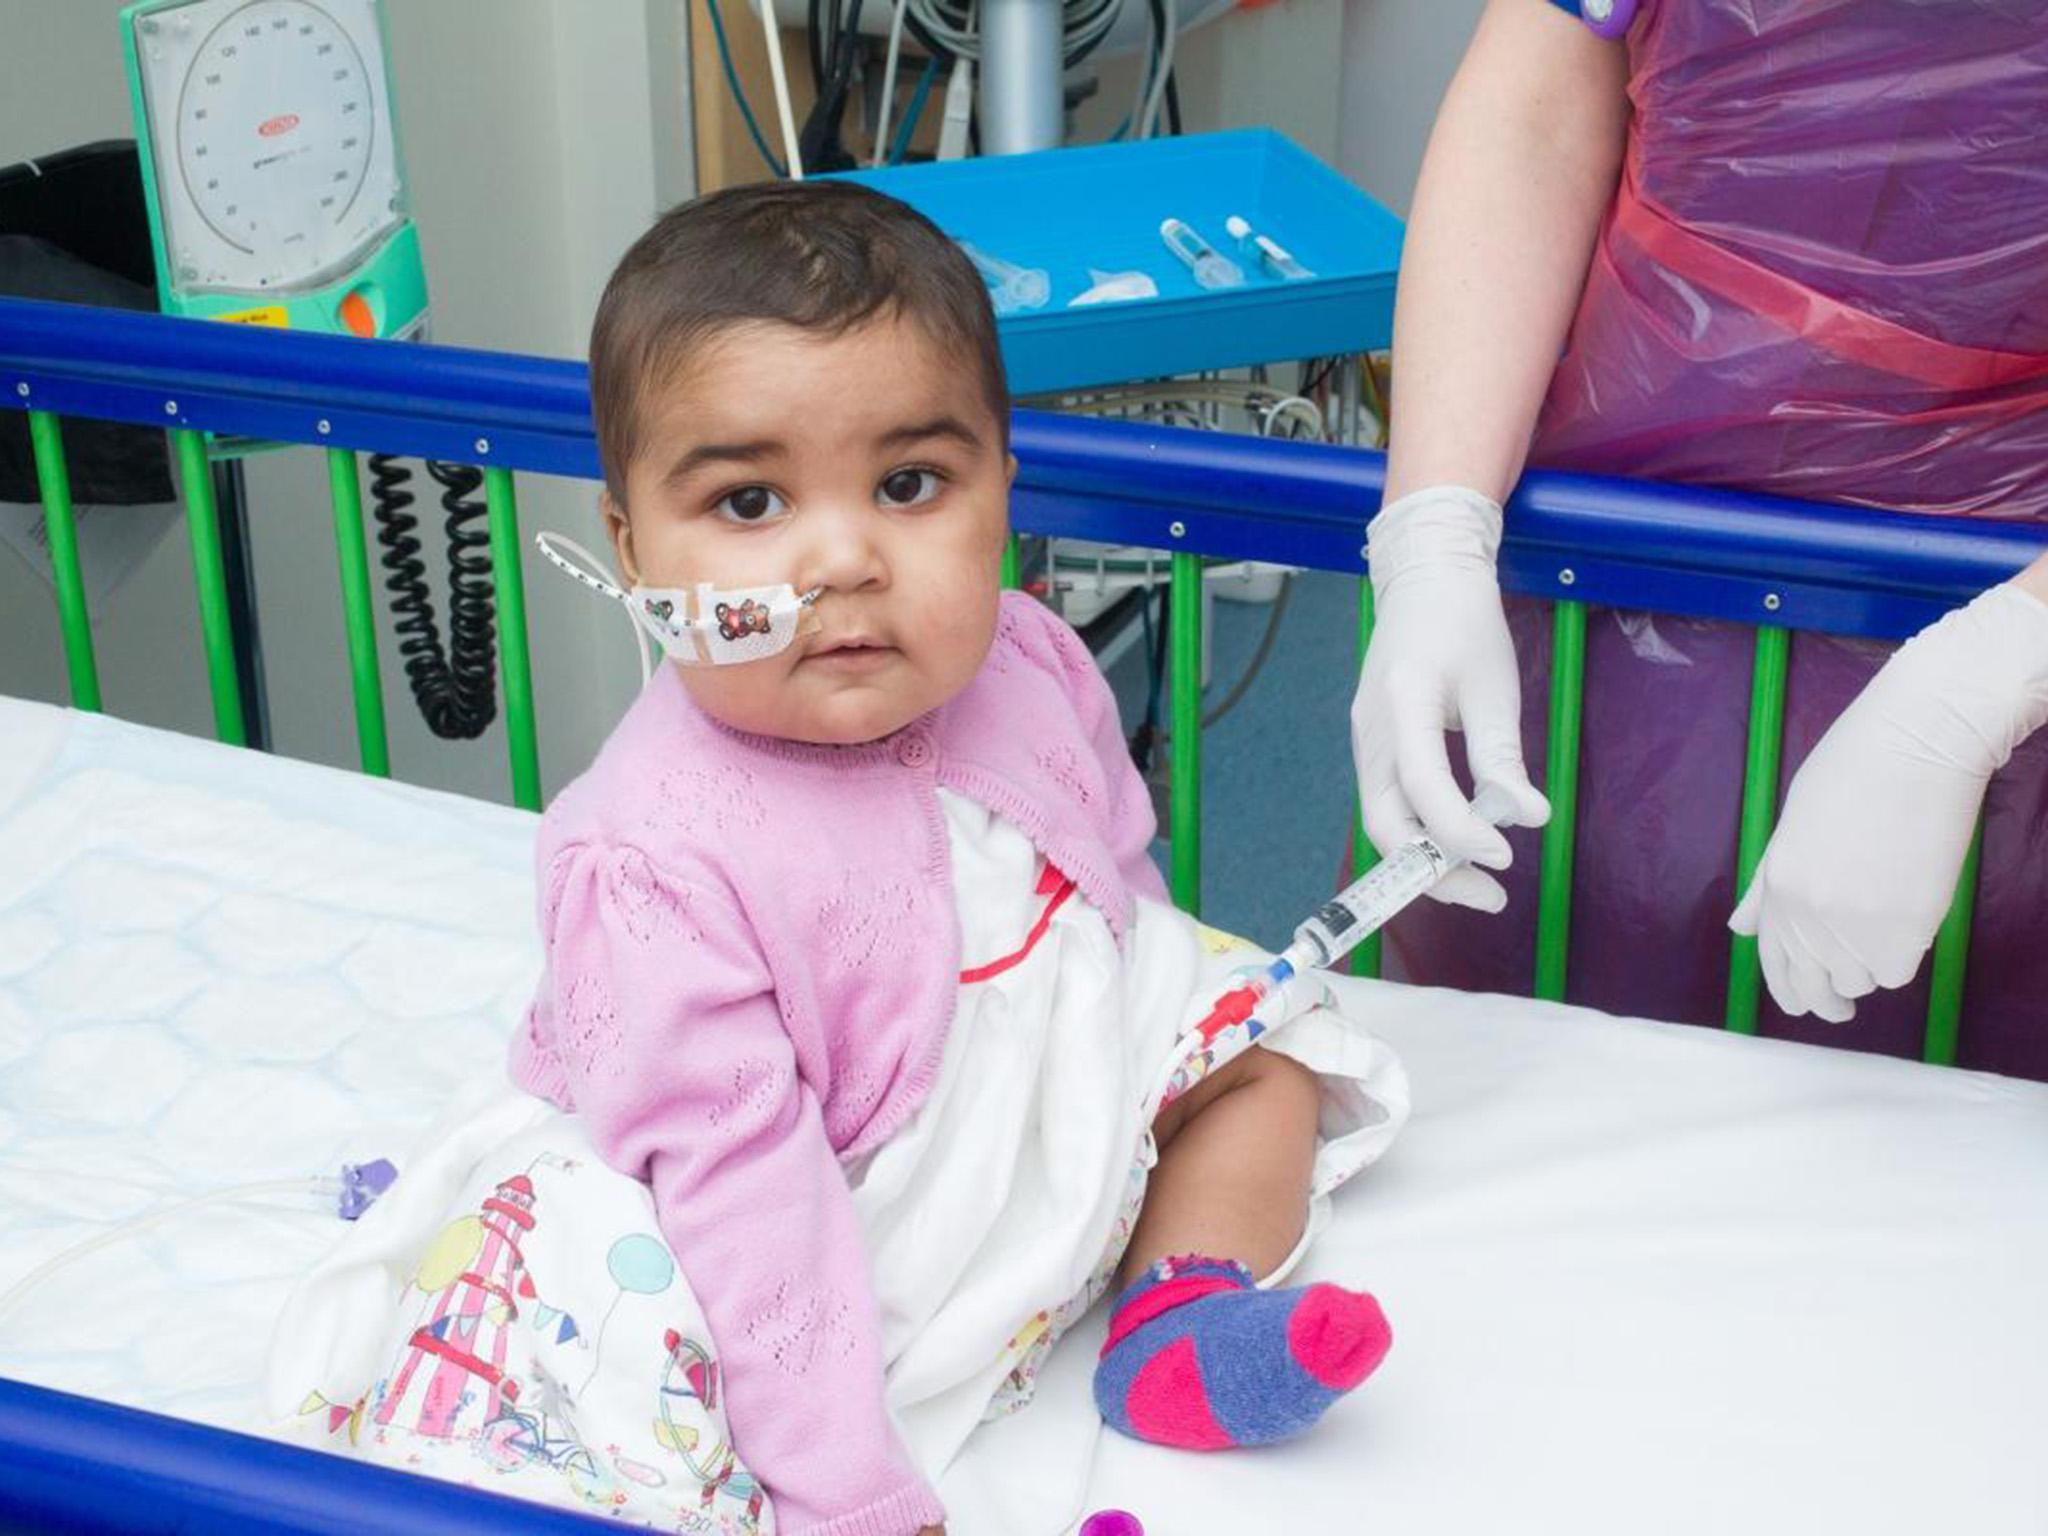 Doctors at London's Great Ormond Street Hospital managed to reverse a previously incurable form of leukemia in Layla Richards